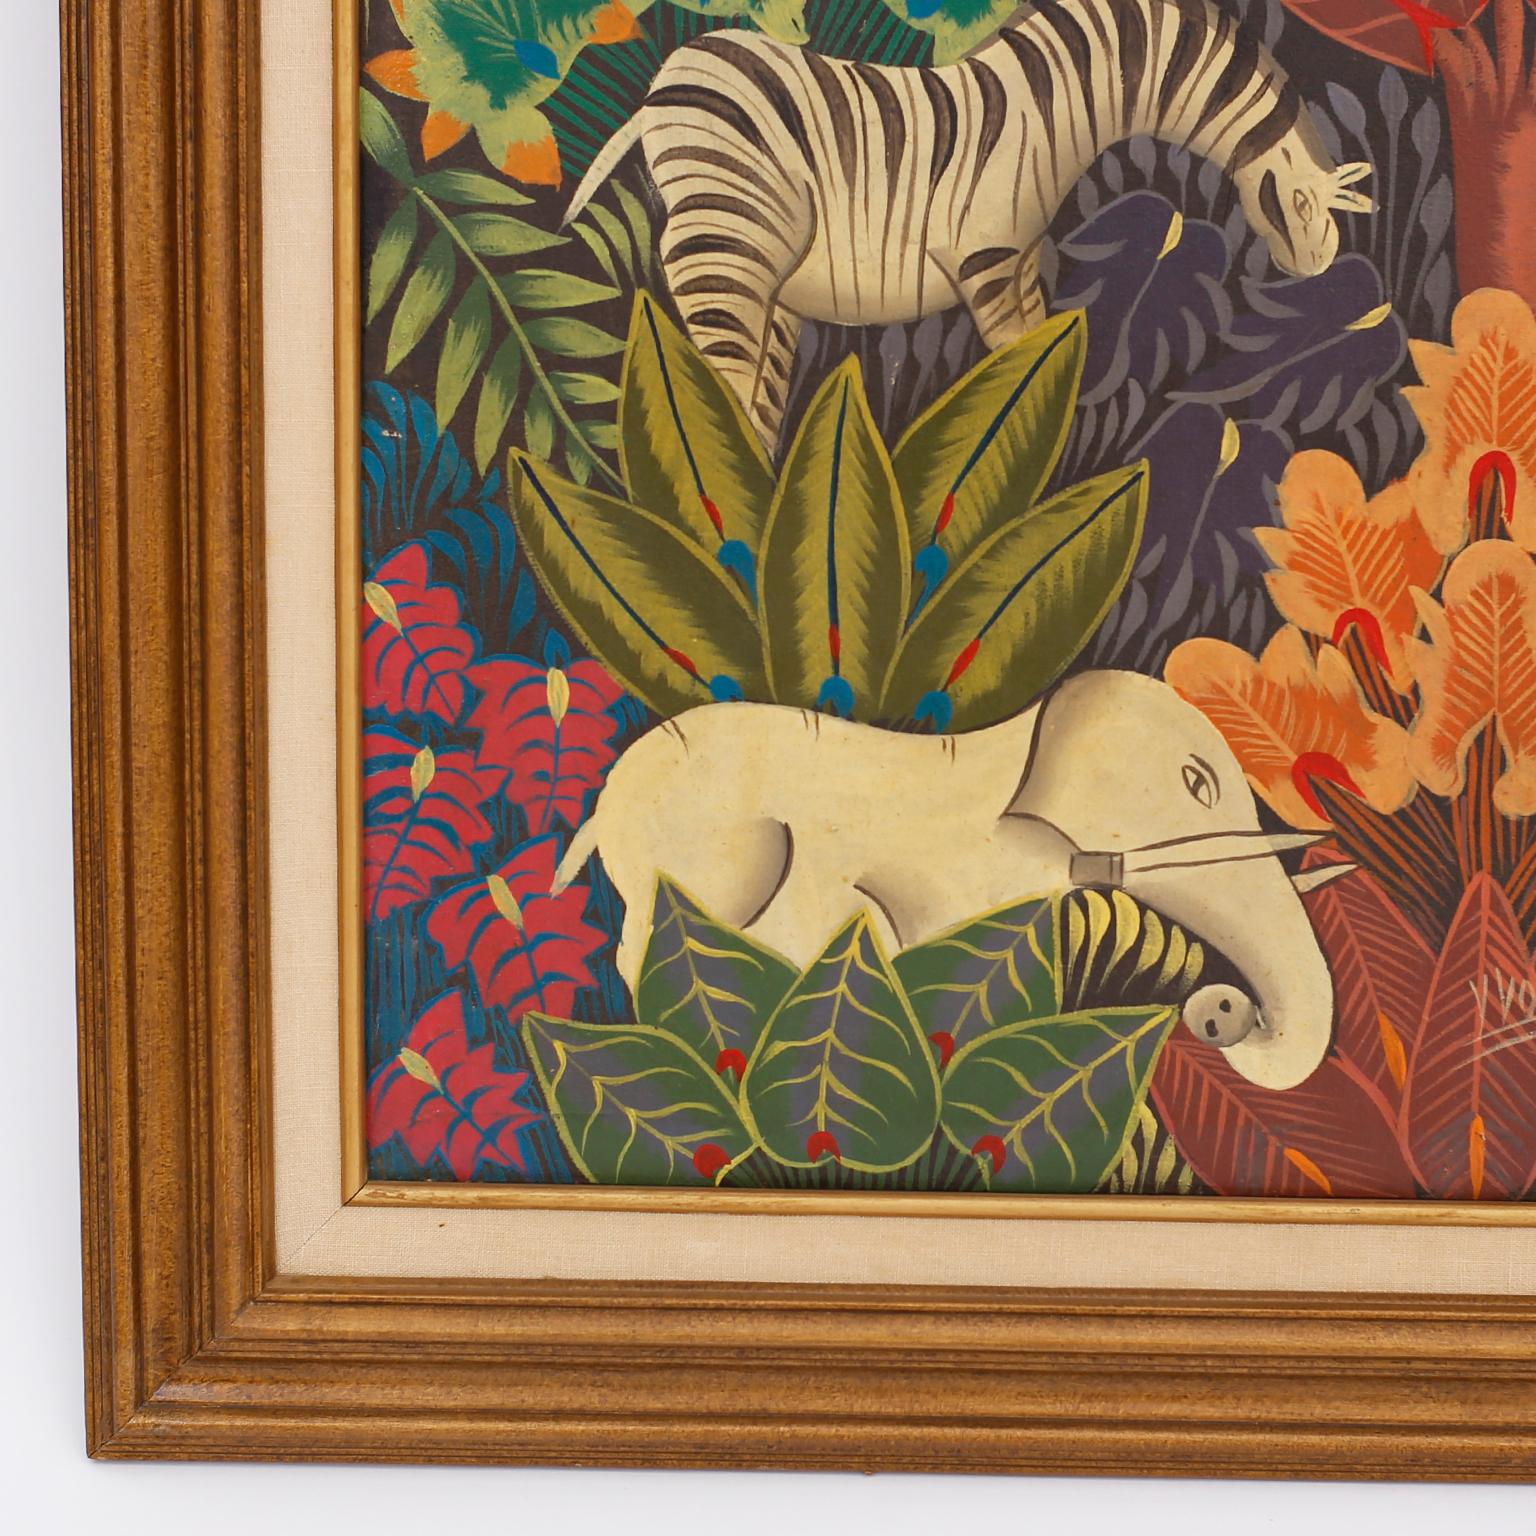 Whimsical oil painting on canvas with zebras and elephants in a stylized jungle setting, painted in a unique folky naive style typical of Haitian artists. Signed Yvon at the bottom and presented in a wood frame.